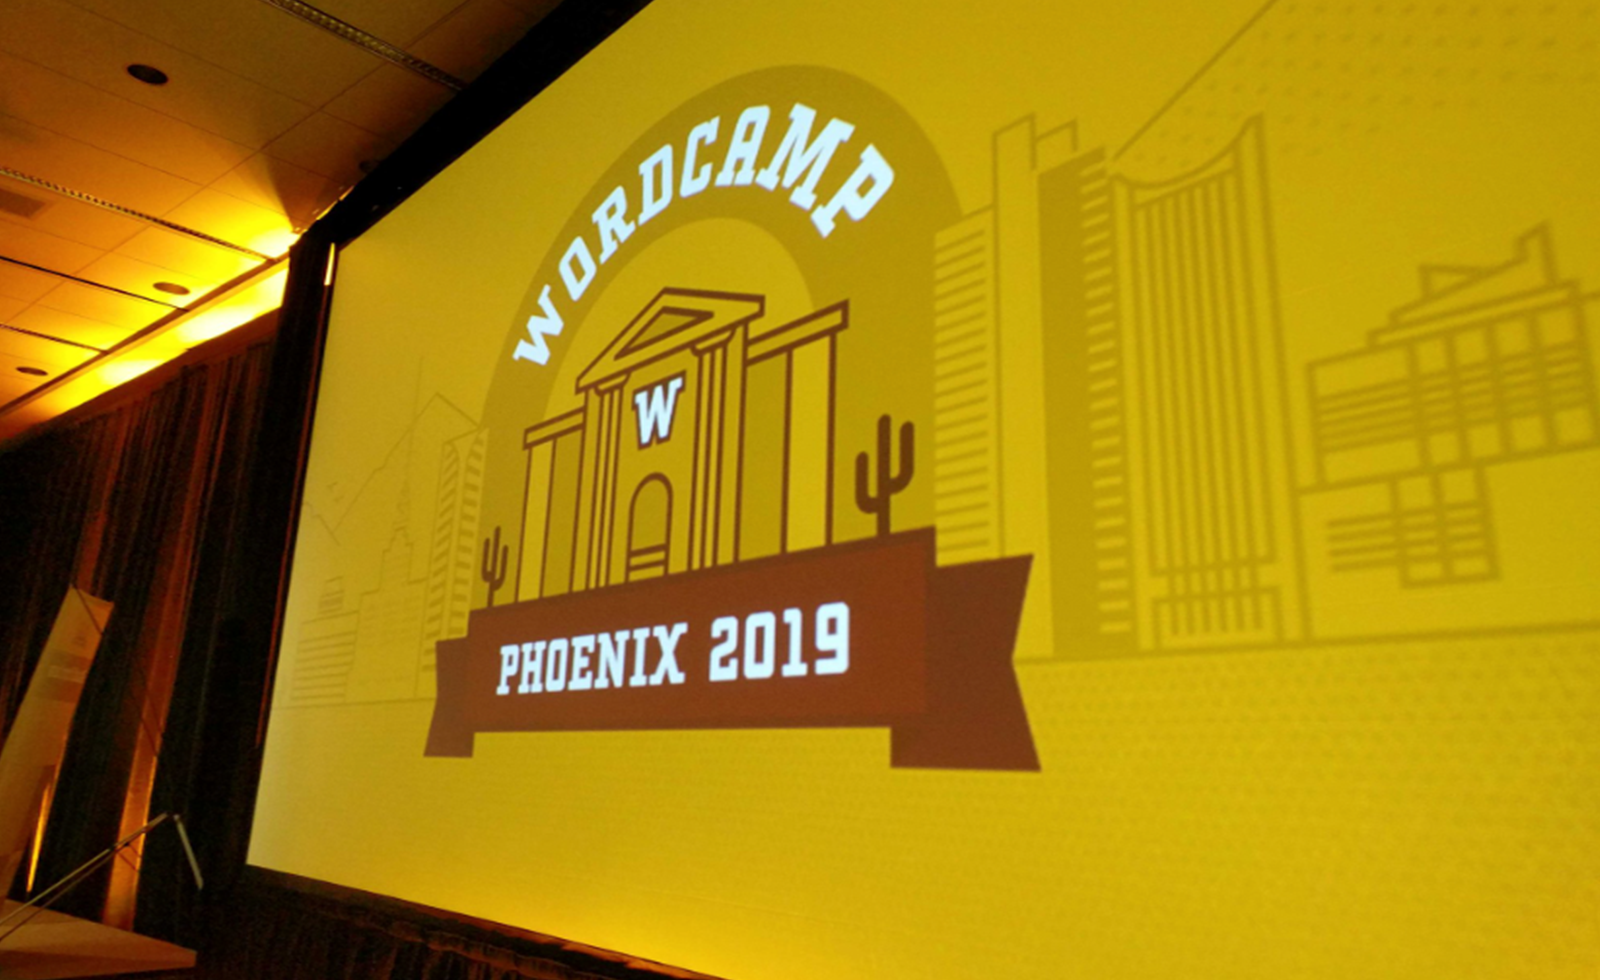 our 5 top takeaways from WordCamp Phoenix